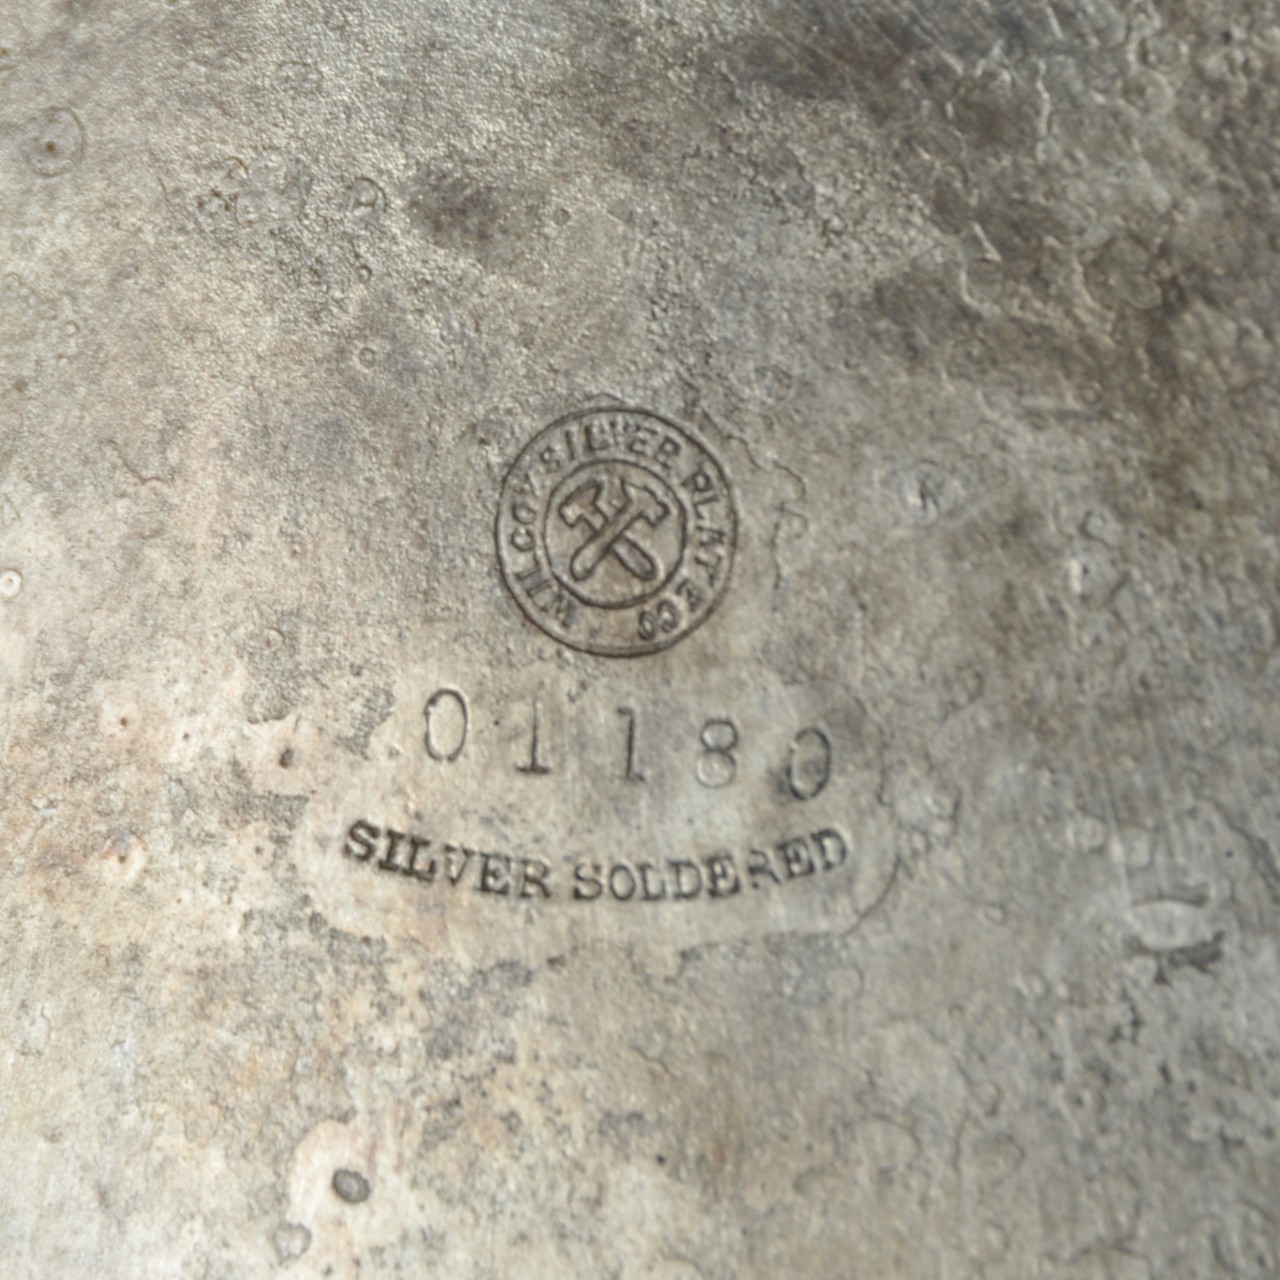 <p>Obverse Side: Hallmark on the reverse side with two crossing hammers within a circle and the words “Wilcox Silver Plate Co.” around the outside of the circle. Below the circle are the numbers “01188” and the words “Silver Soldered”.</p>